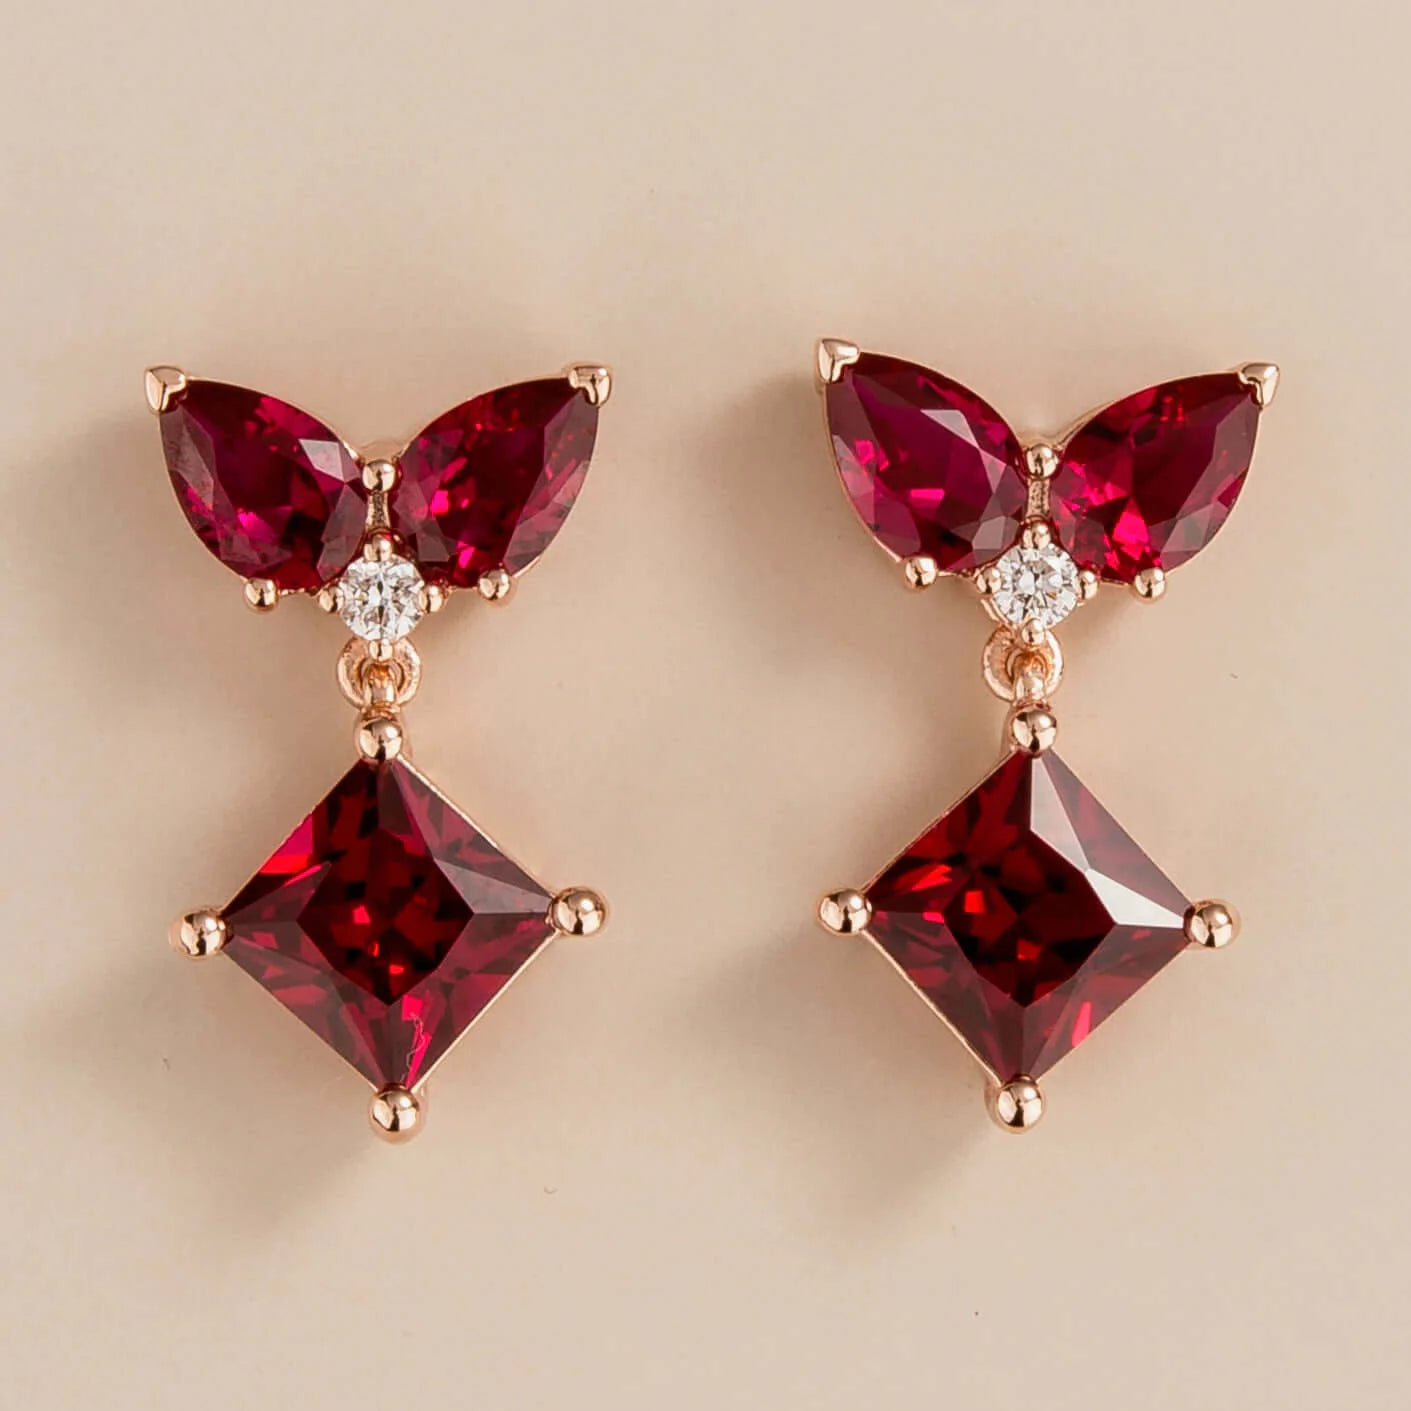 Amore earrings in 18k pink gold vermeil set with lab grown diamond and ruby gem stones.